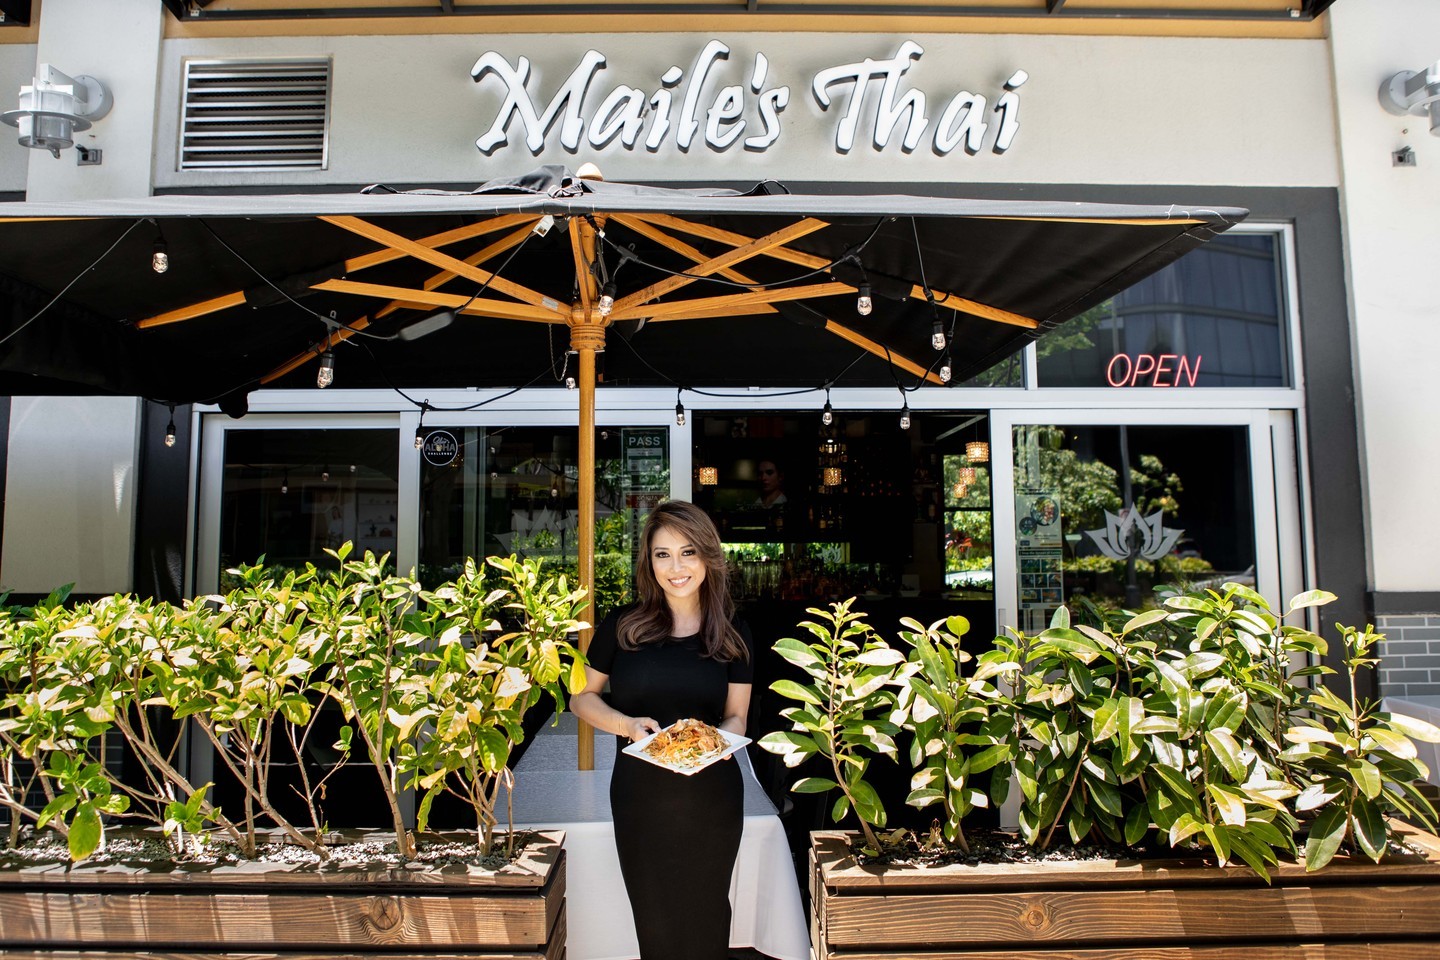 Looking for new options for your lunch or dinner plans? @mailesthaibistro is open from 11am to serve Thai food with a local twist. Whether you are craving papaya salad, seafood curry or a unique beverage, Maile's Thai Bistro has inventive and traditional offerings that satisfy — with indoor dining and outdoor seating available!